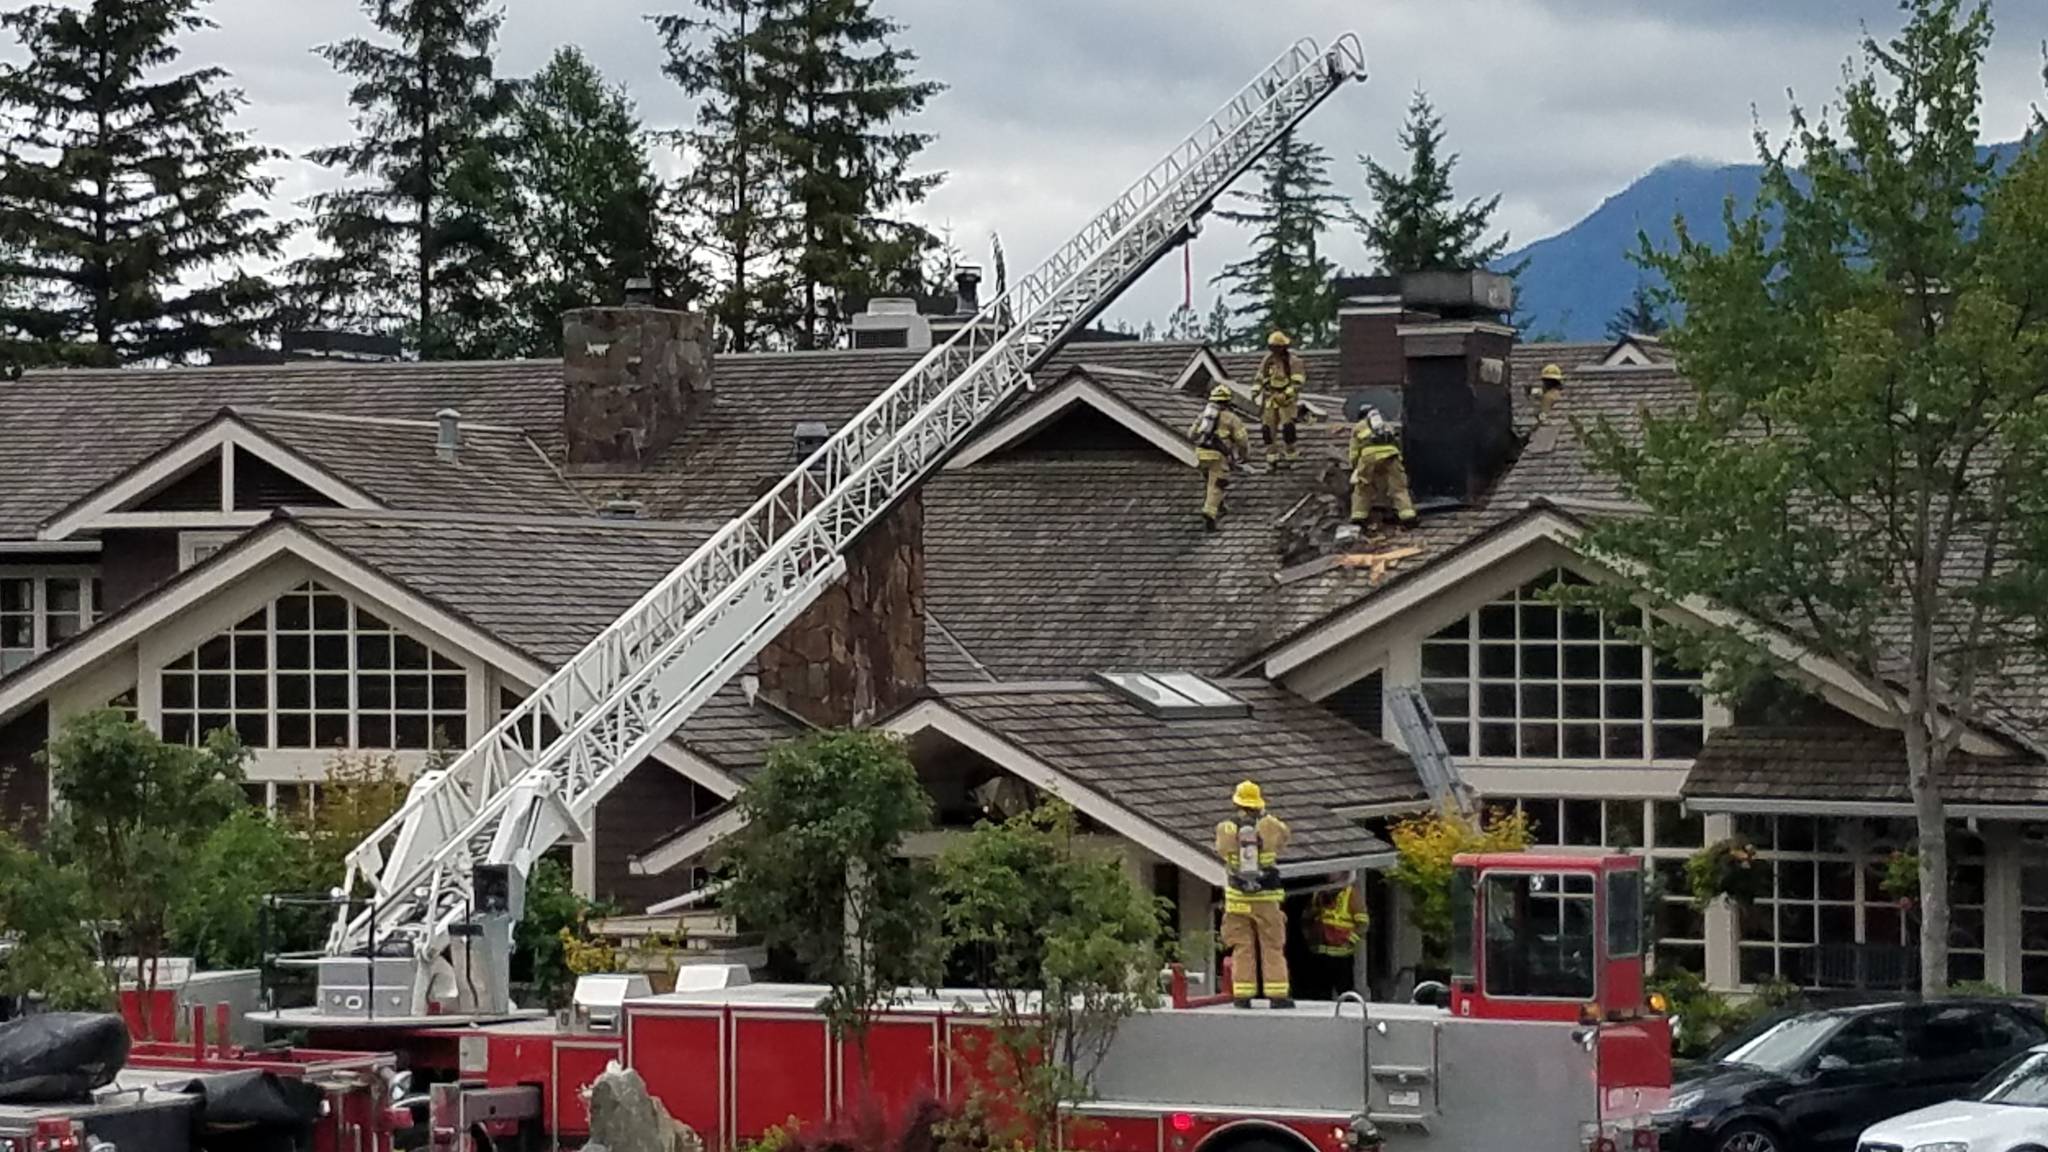 Firefighters respond to a fire at Salish Lodge and Spa on July 21. Photo by City of Snoqualmie